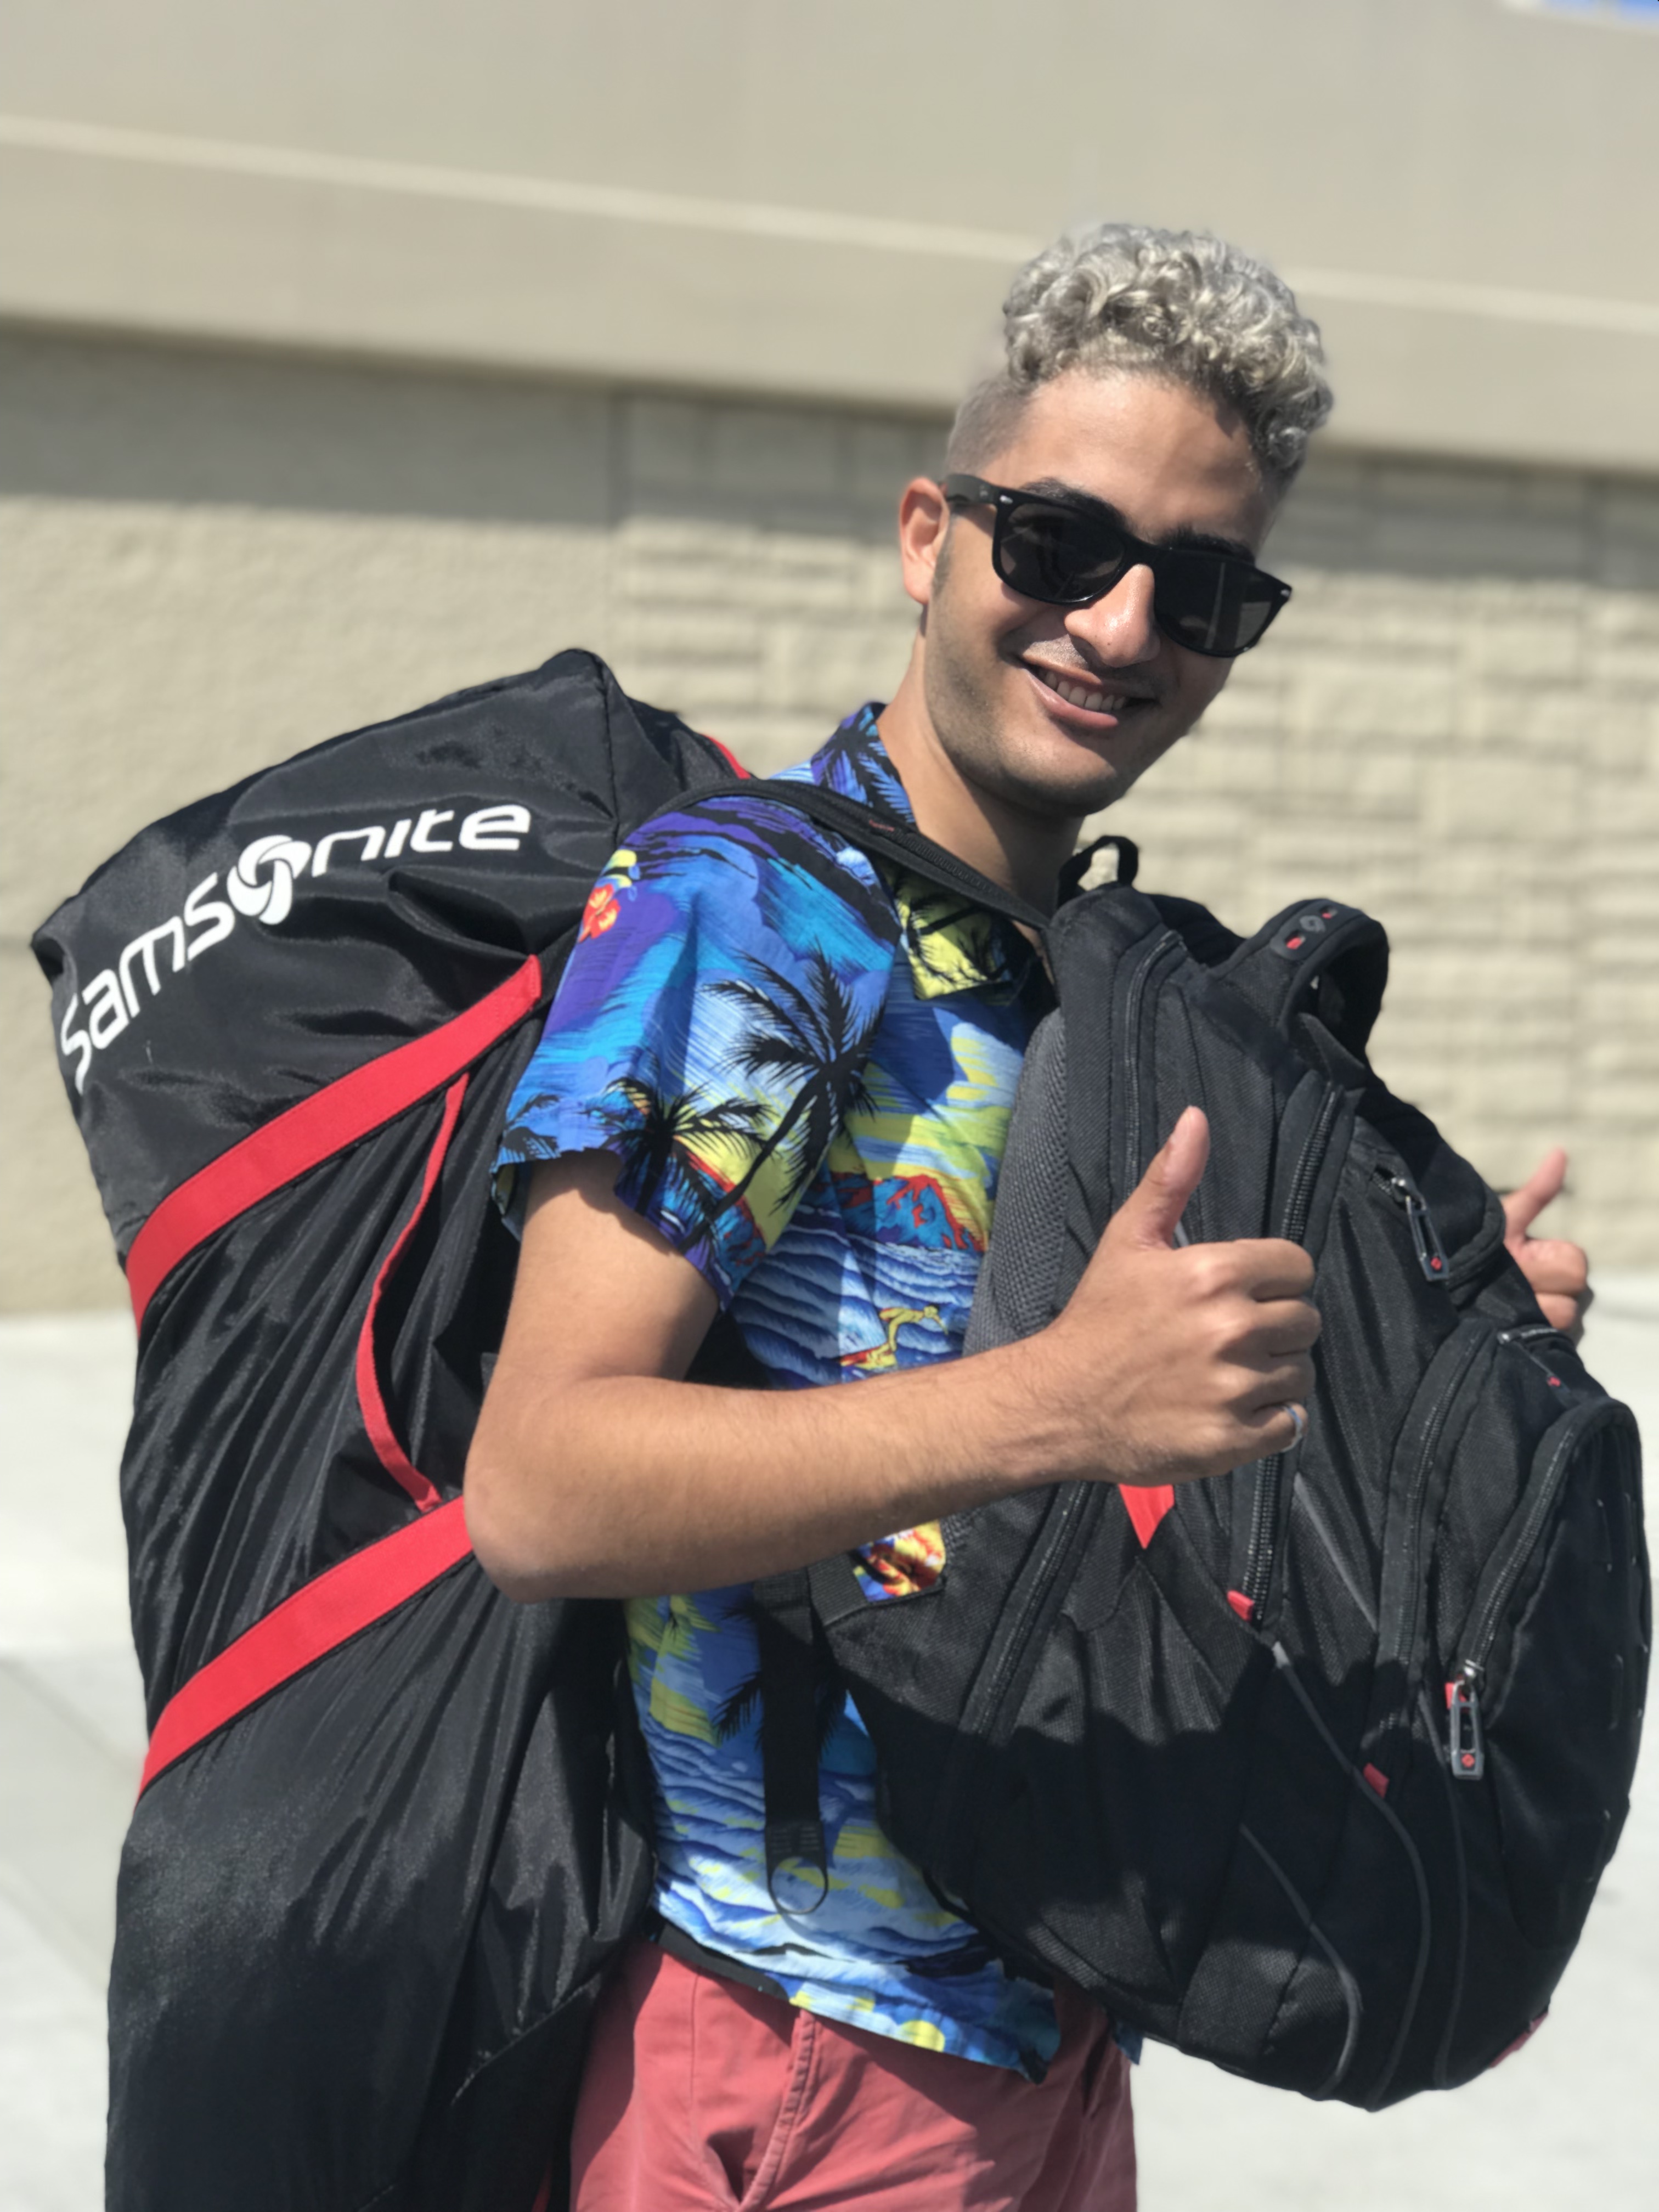 Me with two thumbs up carrying two backpacks in San Francisco, August 2019